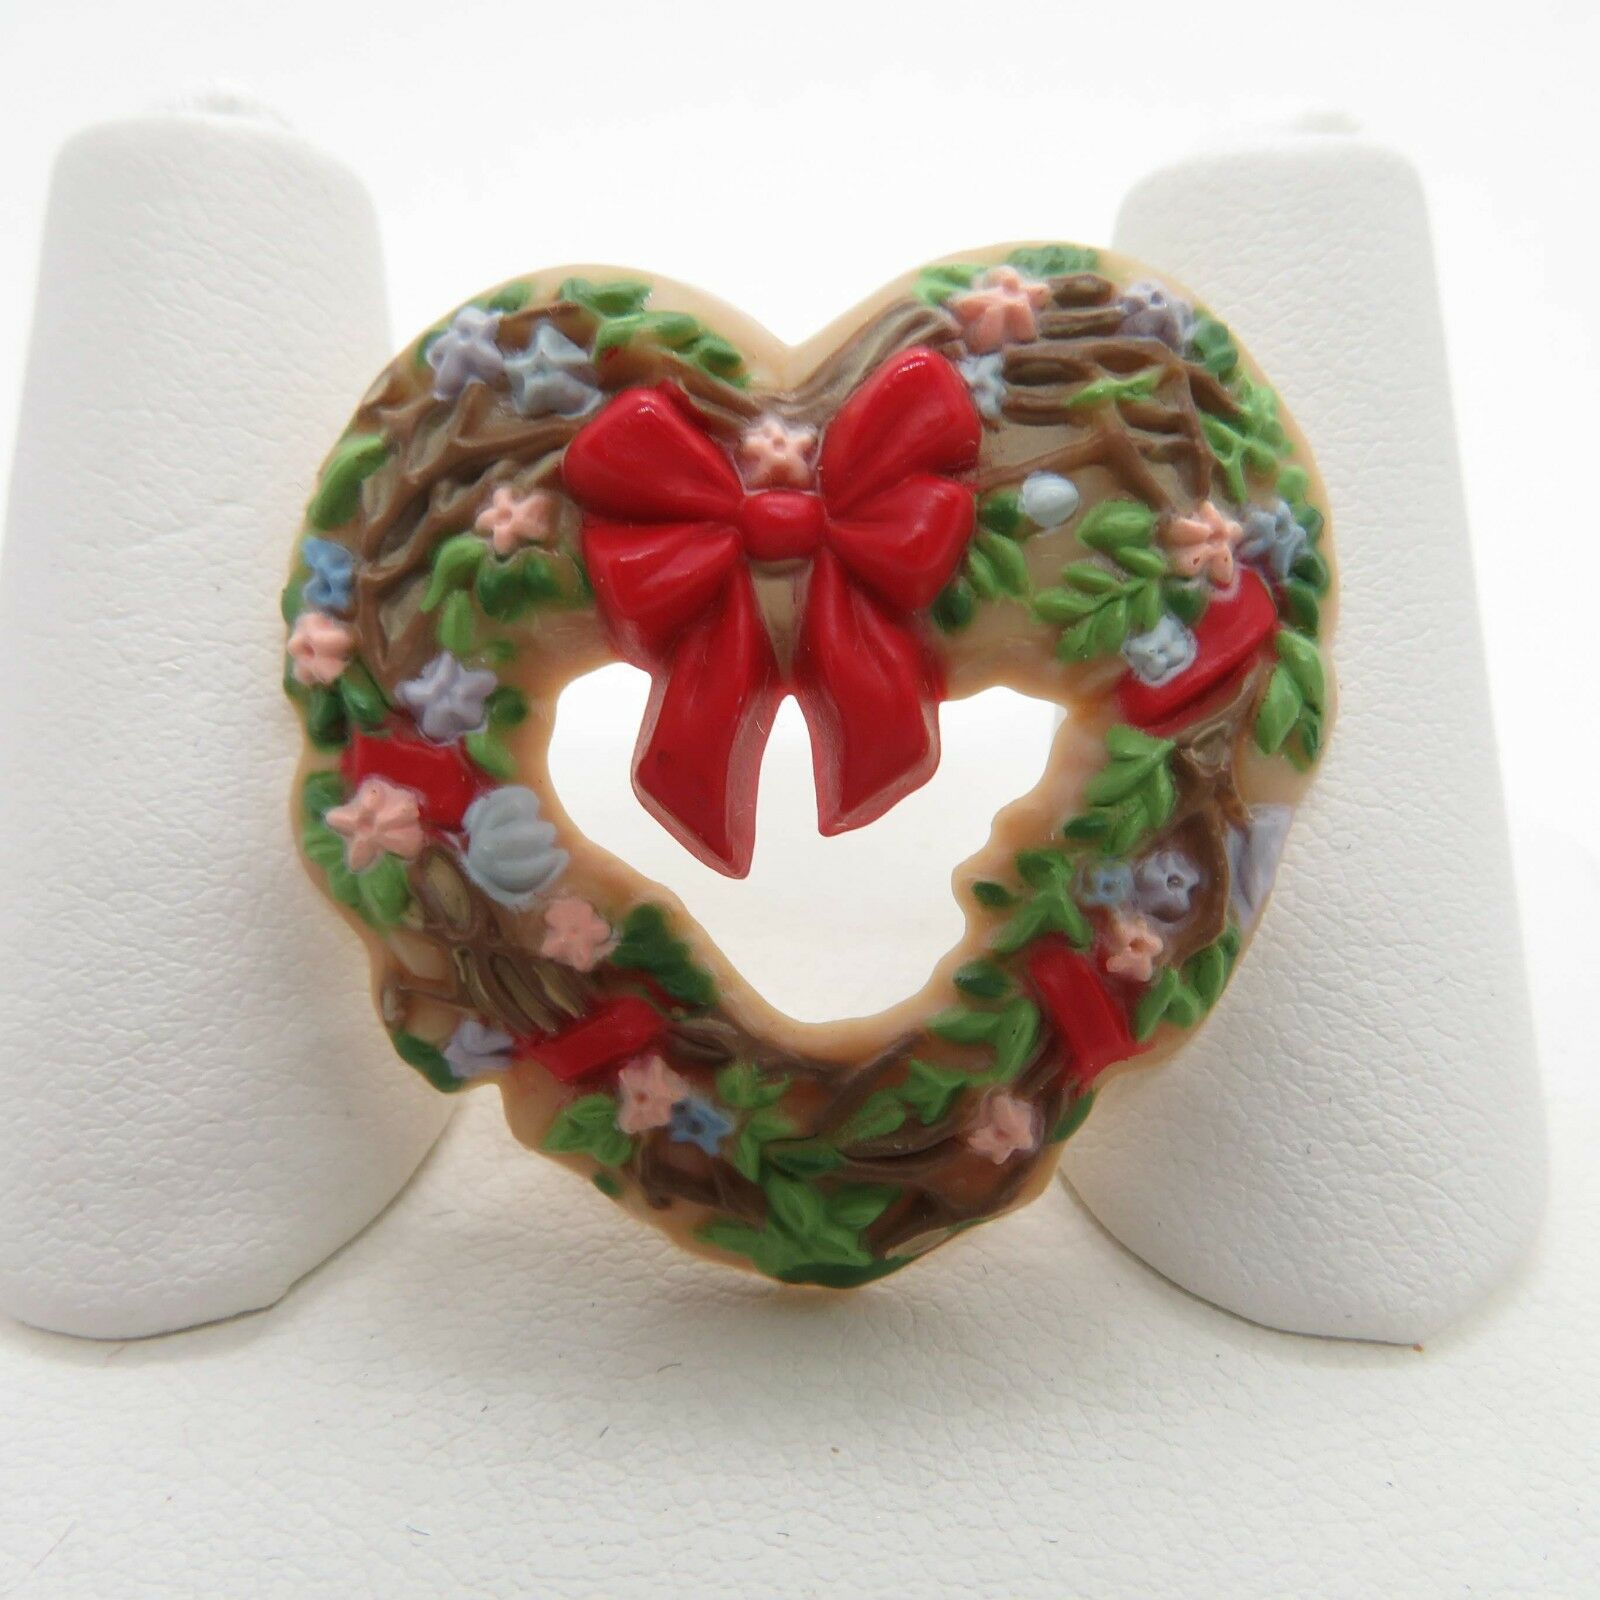 Heart Wreath Pin Brooch Vintage Christmas Hallmark Winter Red Bow 1985 Jewelry - At Grandma's Table